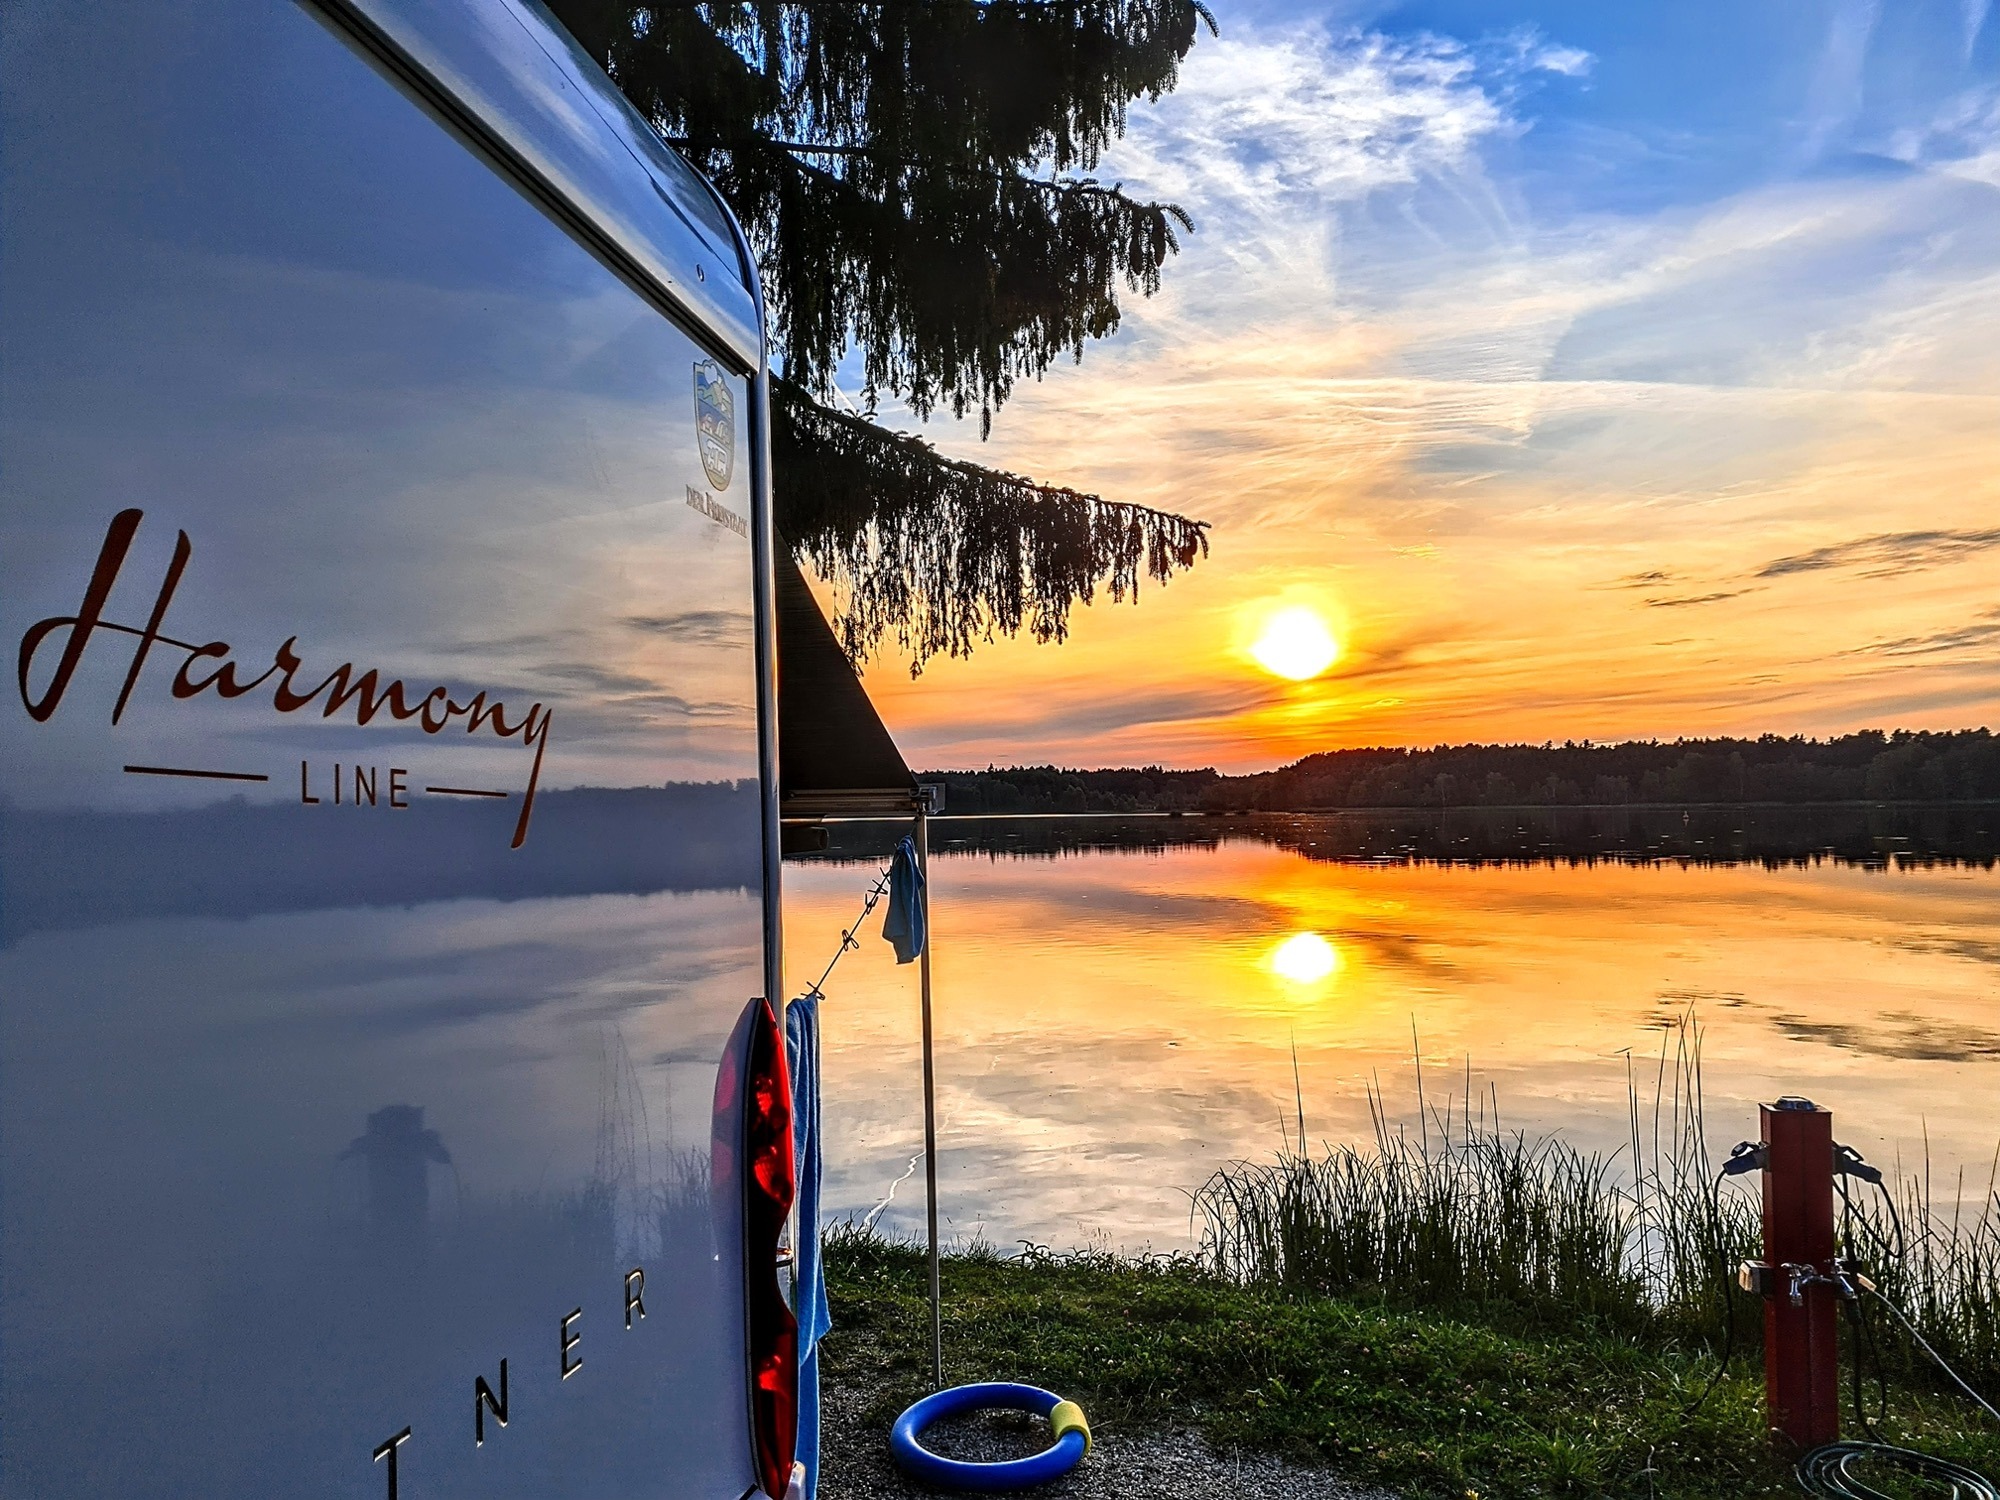 Camper bei Sonnenuntergang am See - Camping in Bayern am See